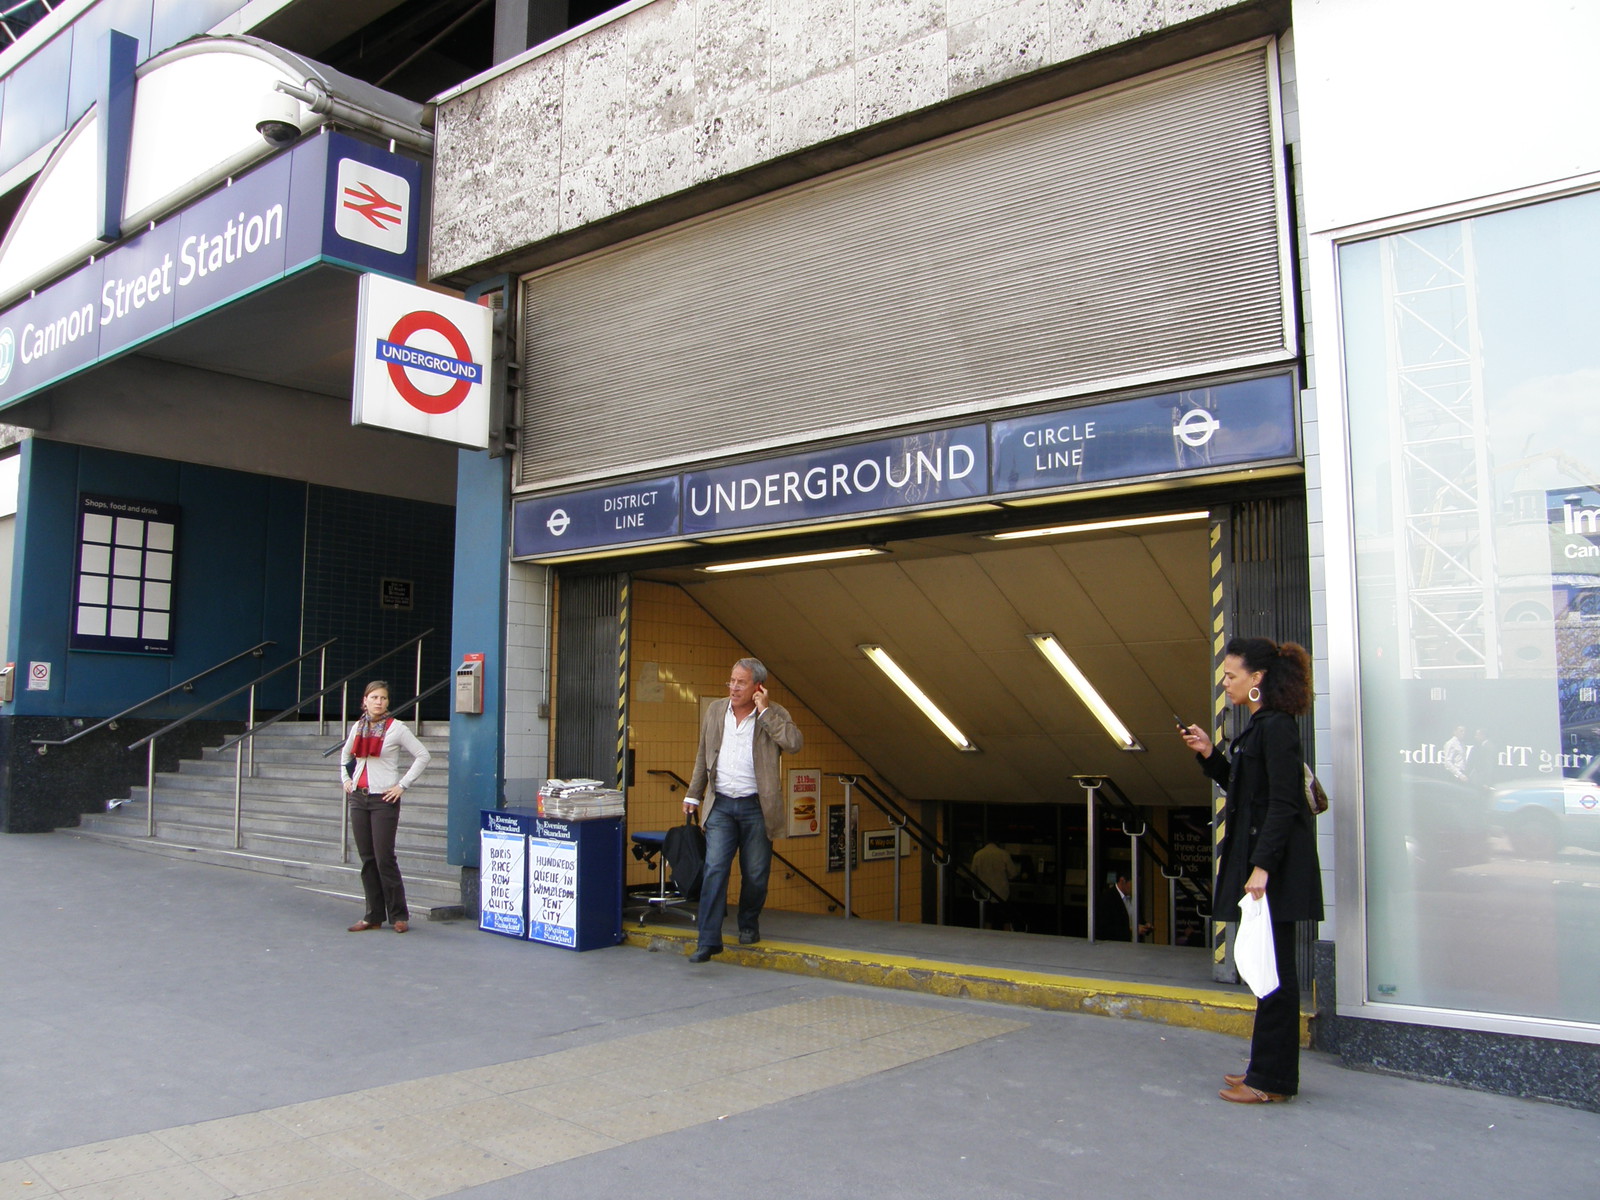 Cannon Street station